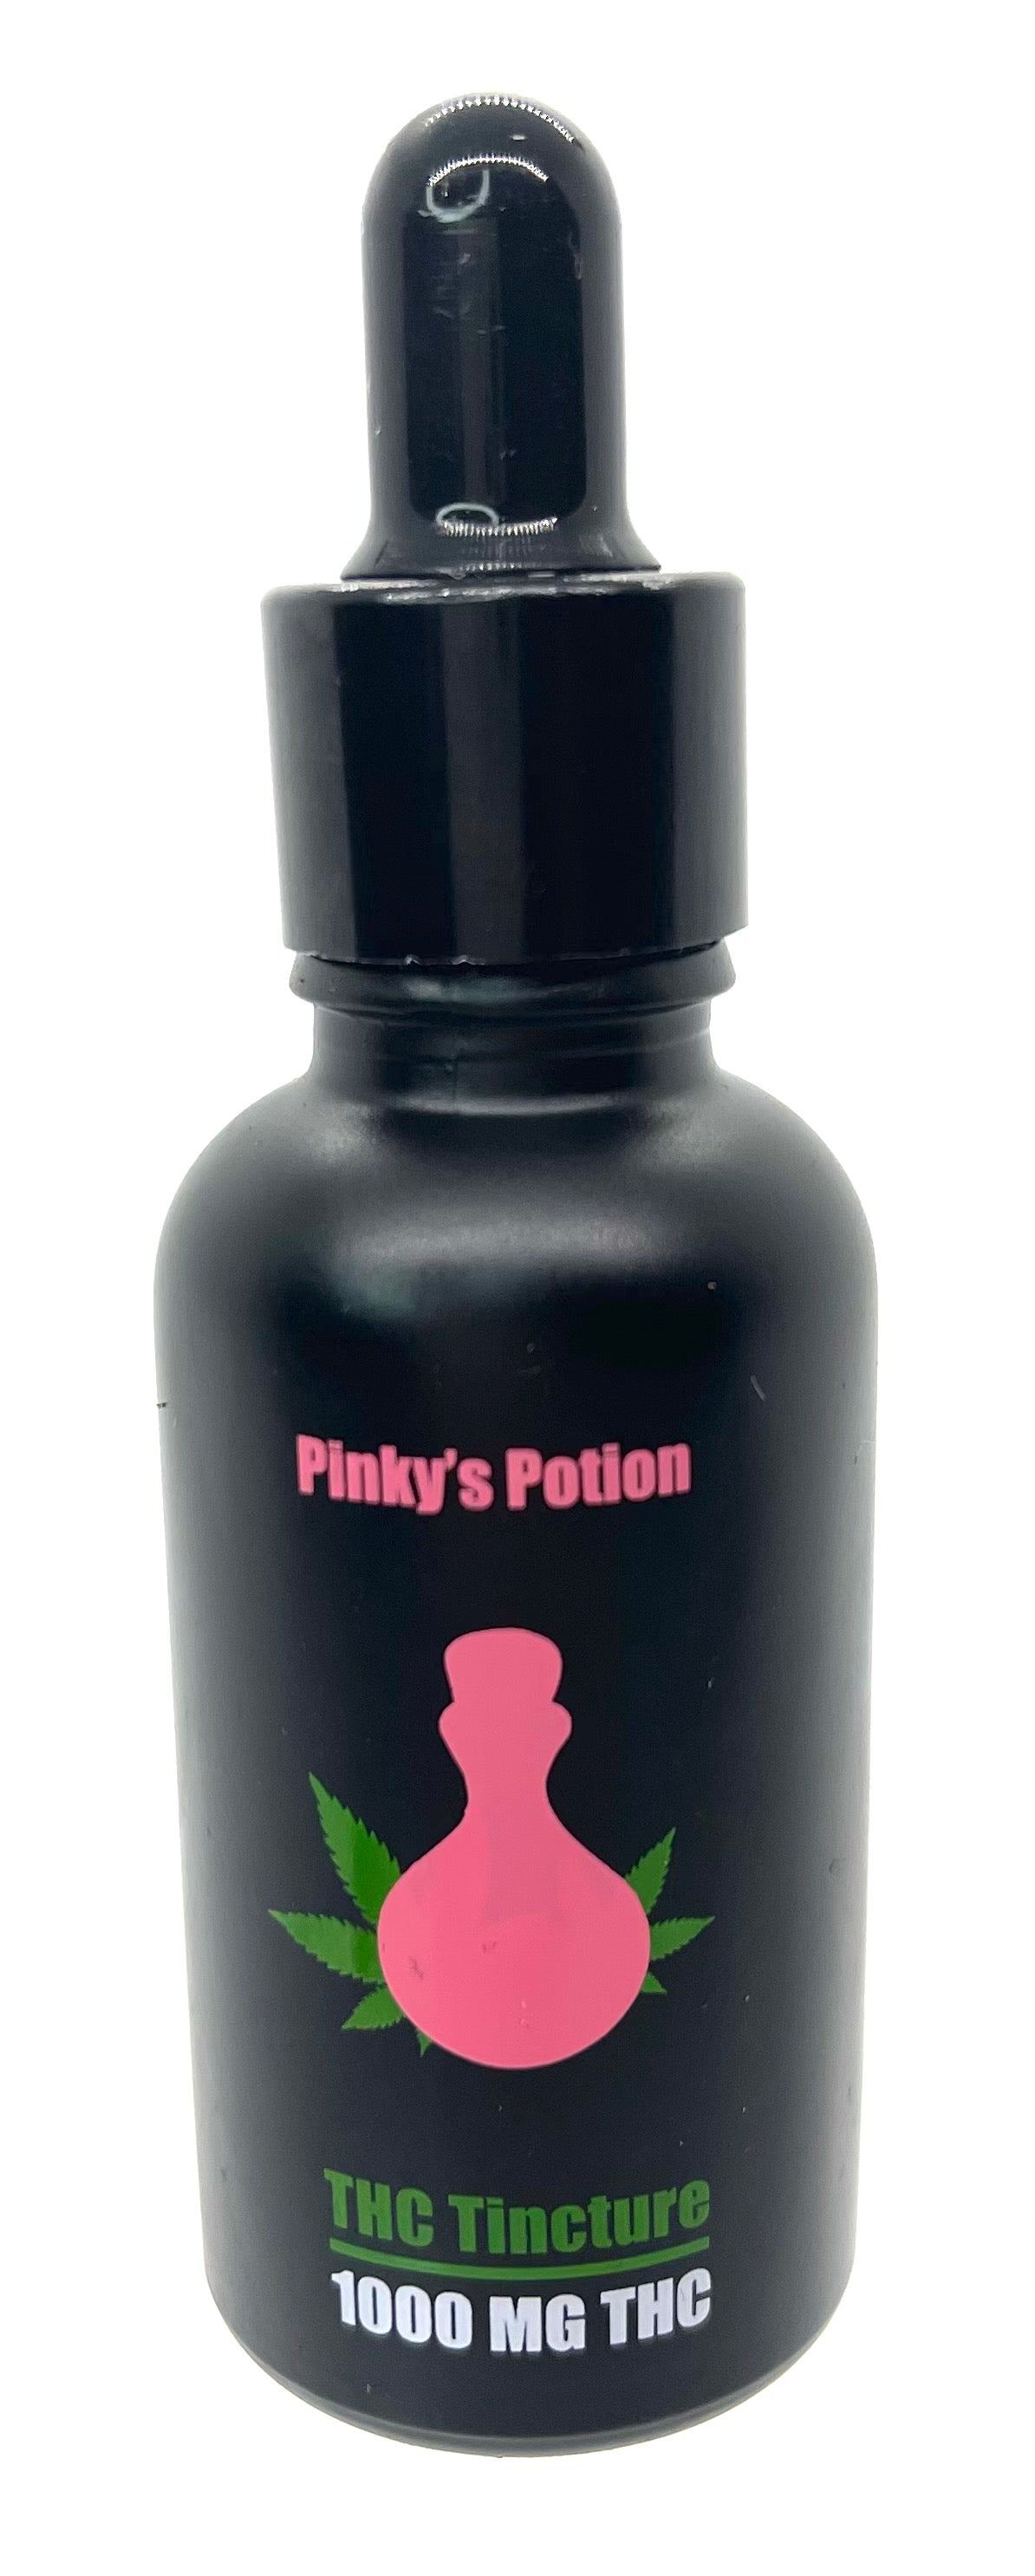 Pinky's Potion: THC Tincture (1000 MG)